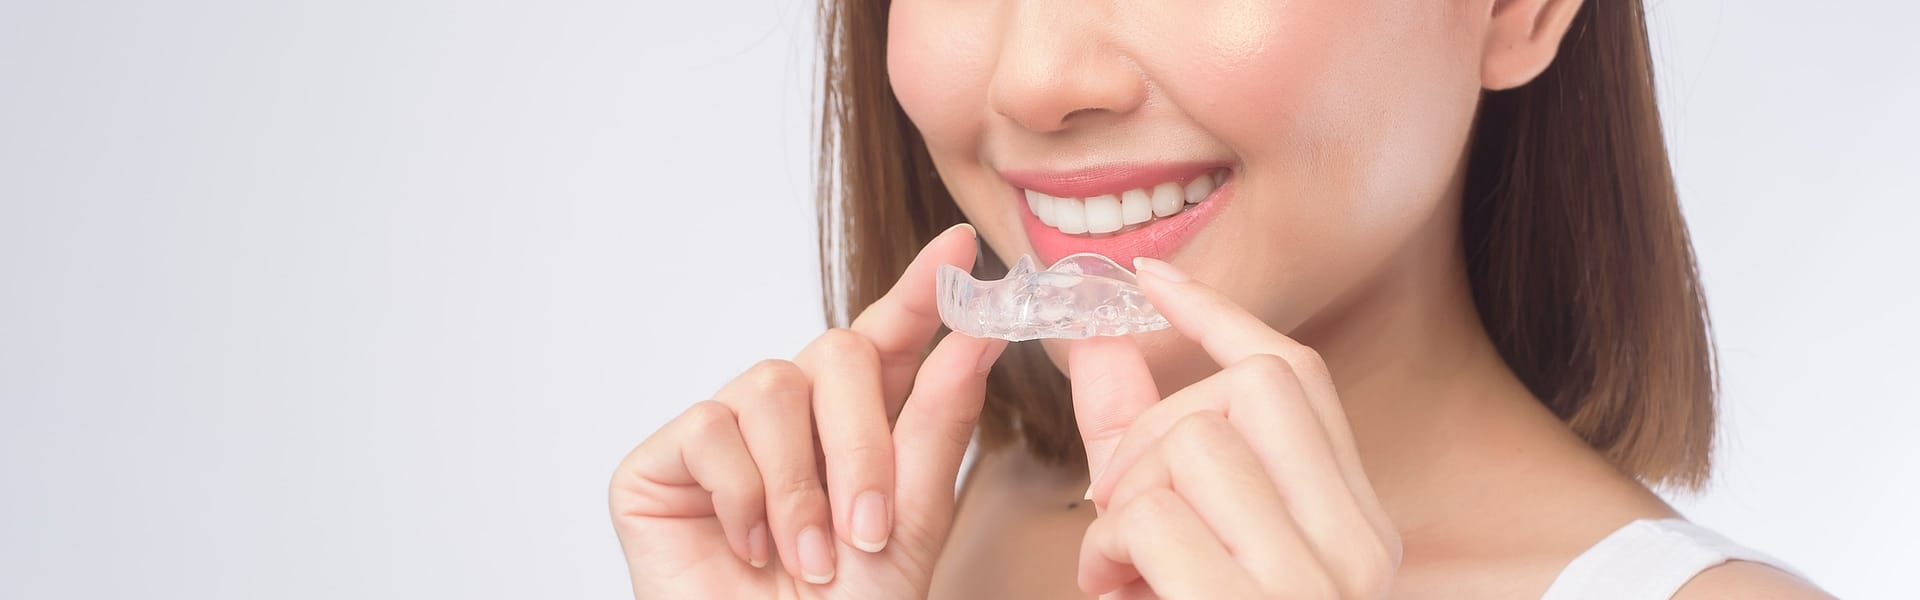 Does Invisalign Work Faster Than Braces?